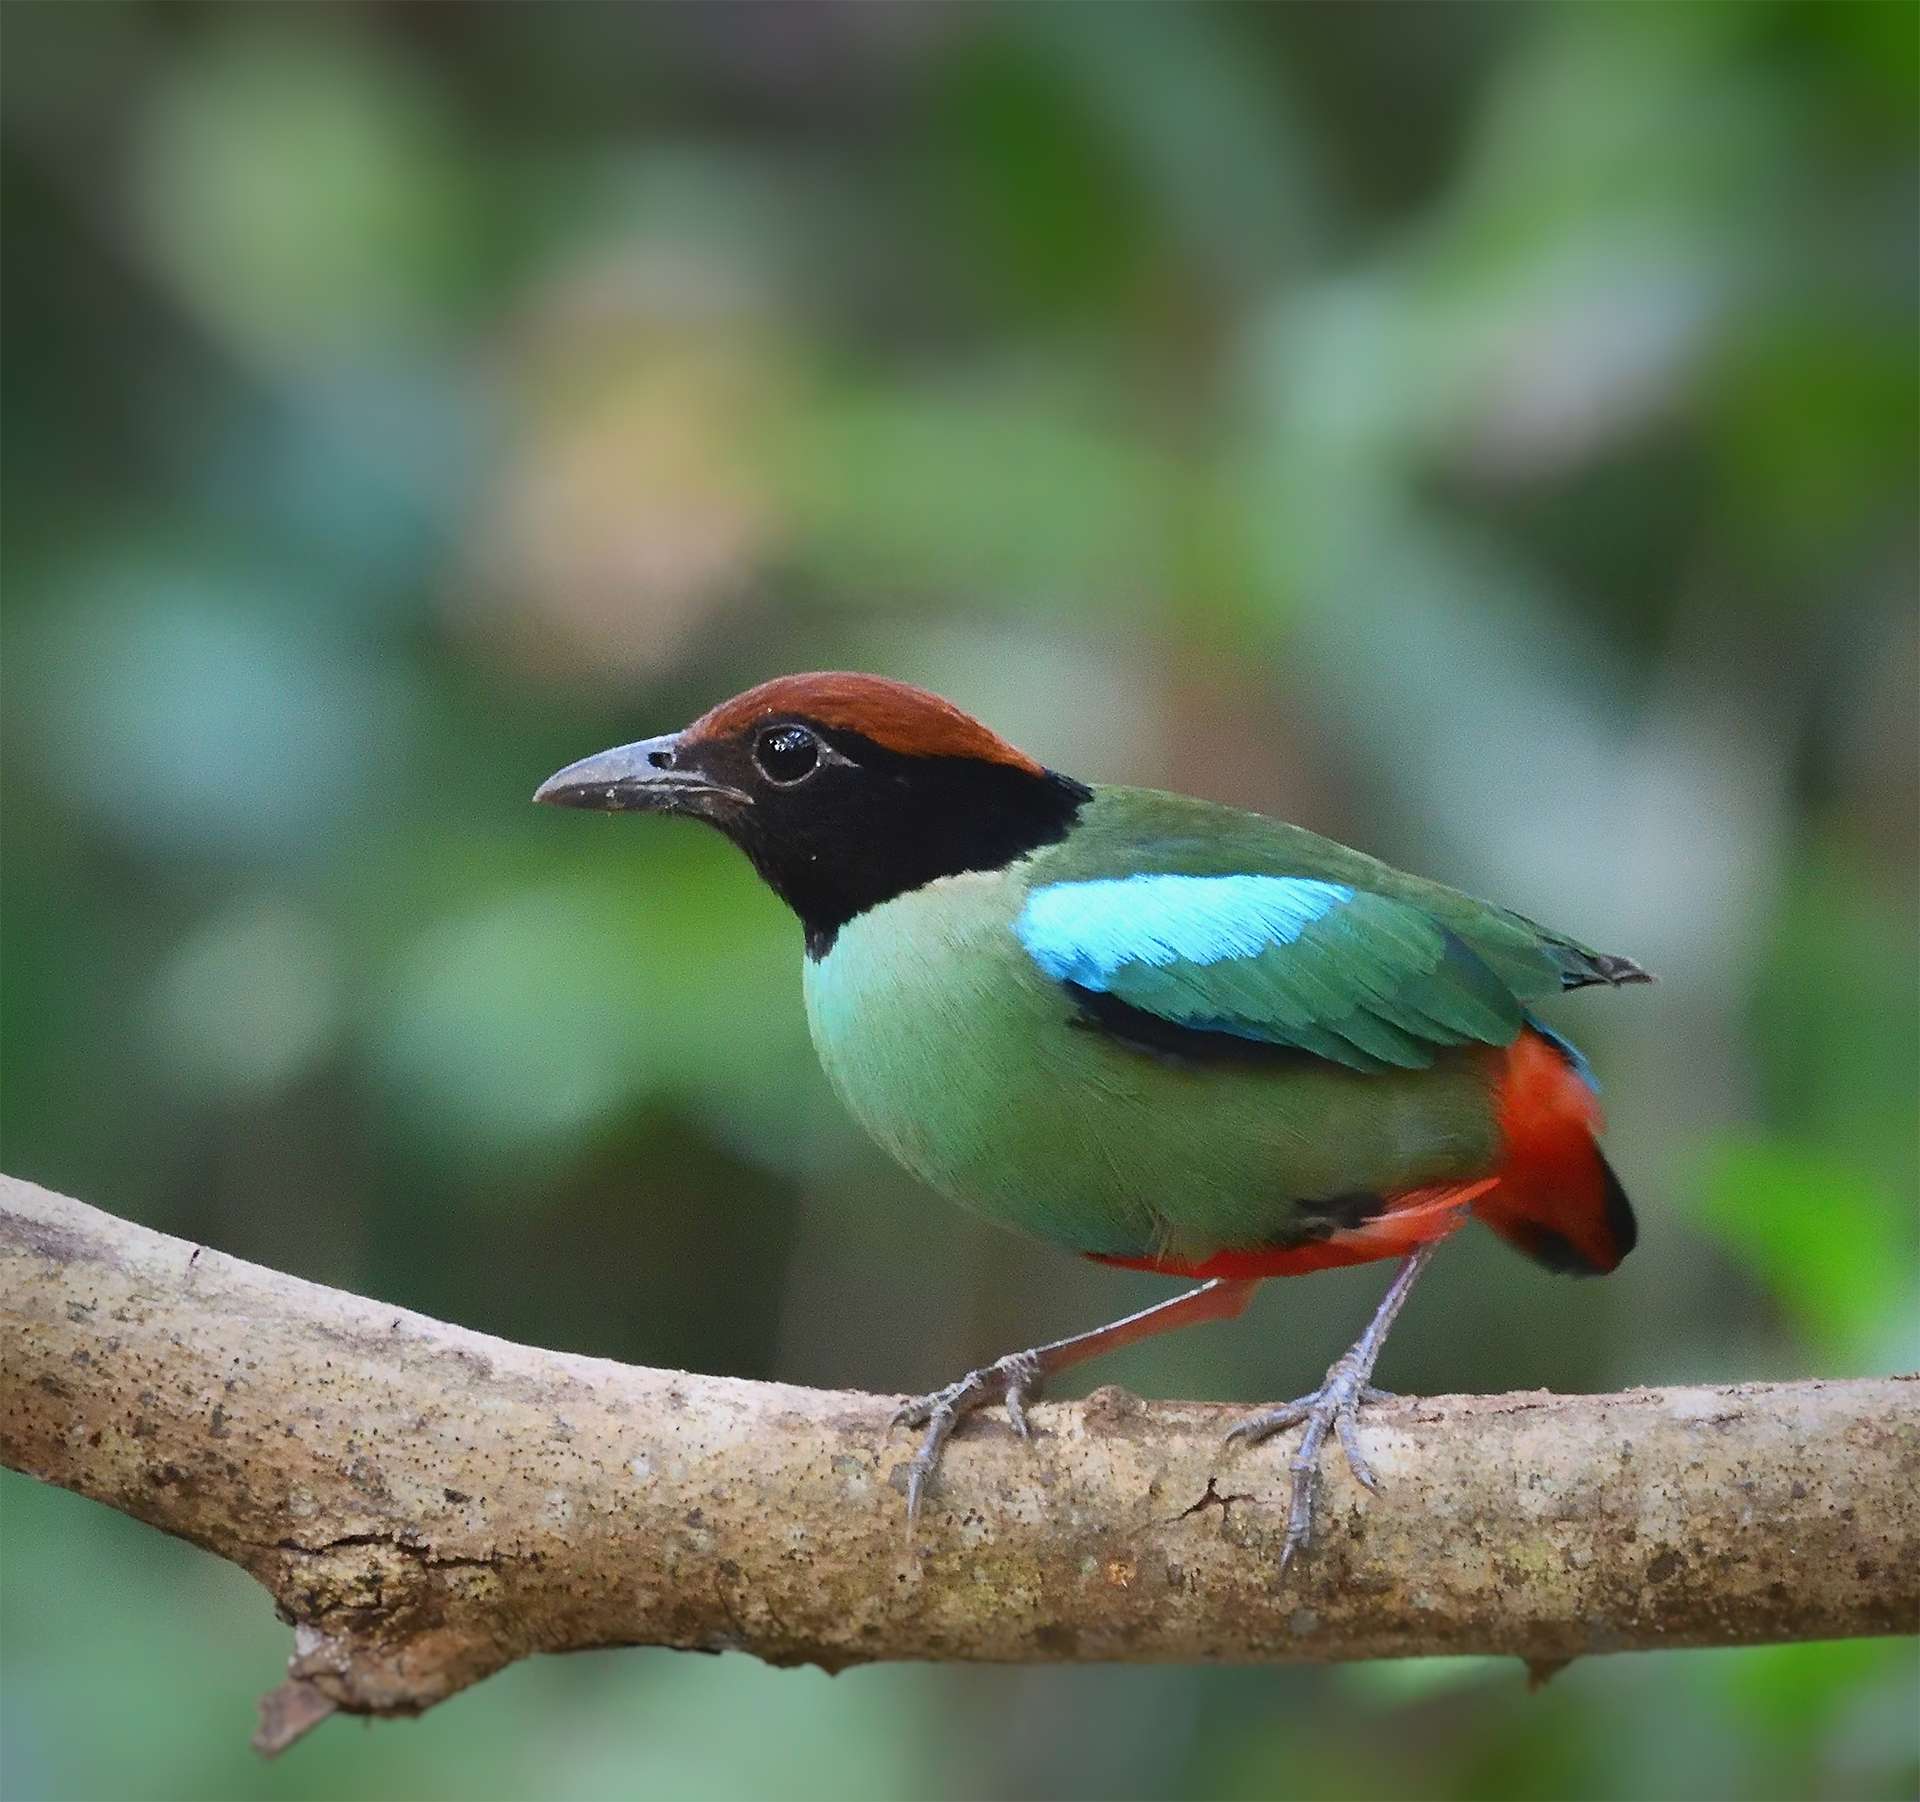 Western Hooded Pitta or Chestnut-crowned Pitta,